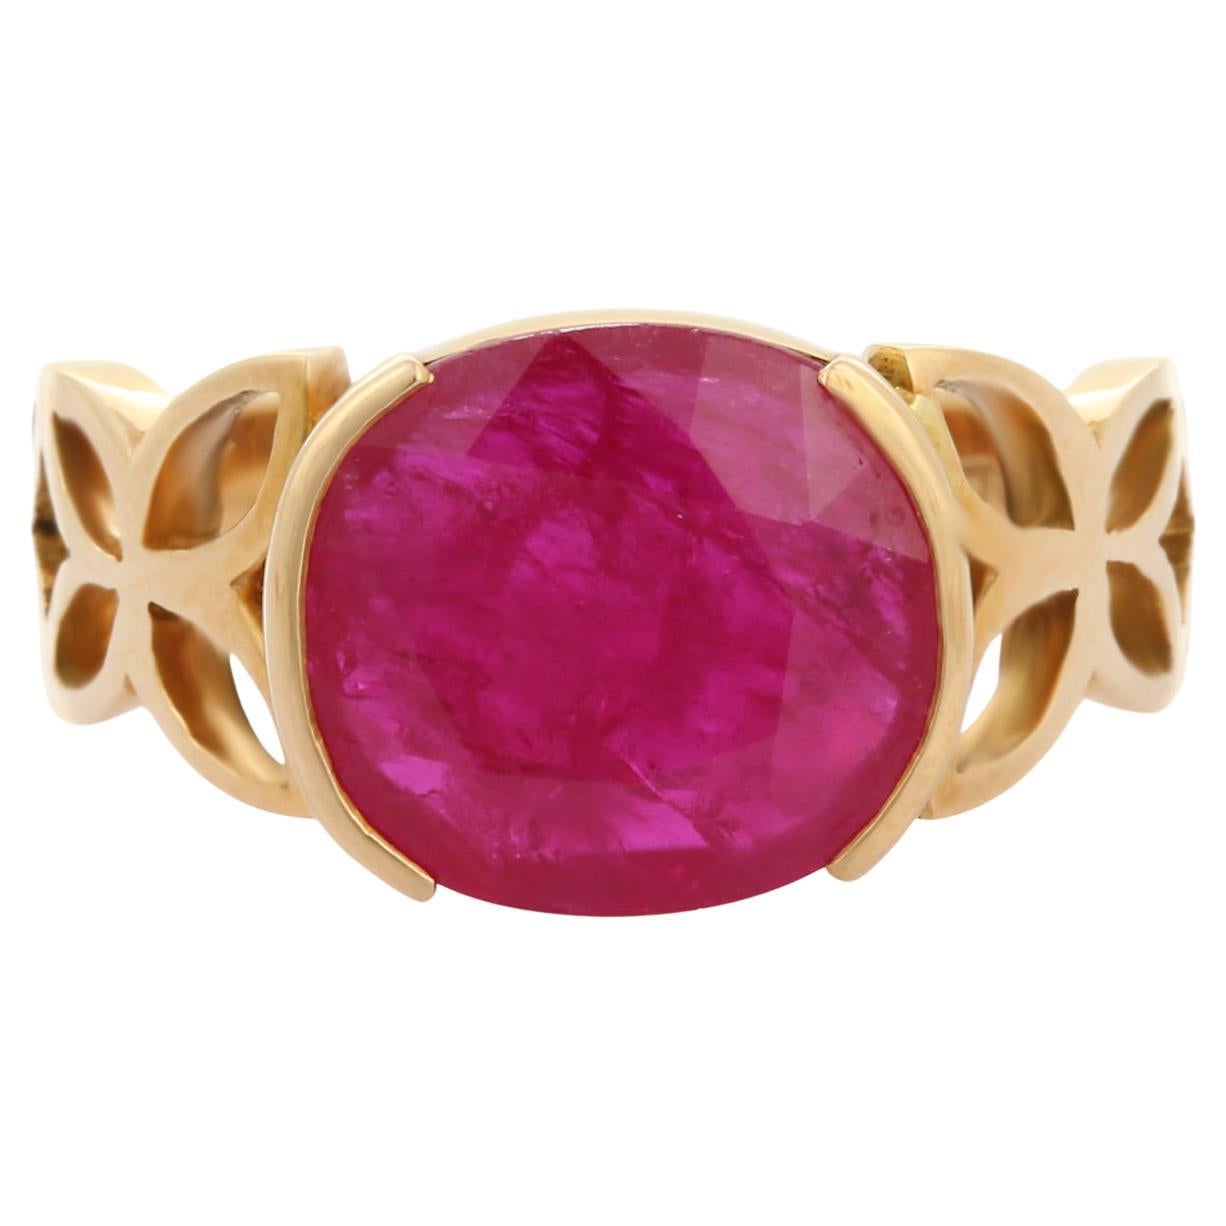 4.6 Carat Ruby Cocktail Ring with Engraving in 18K Solid Yellow Gold